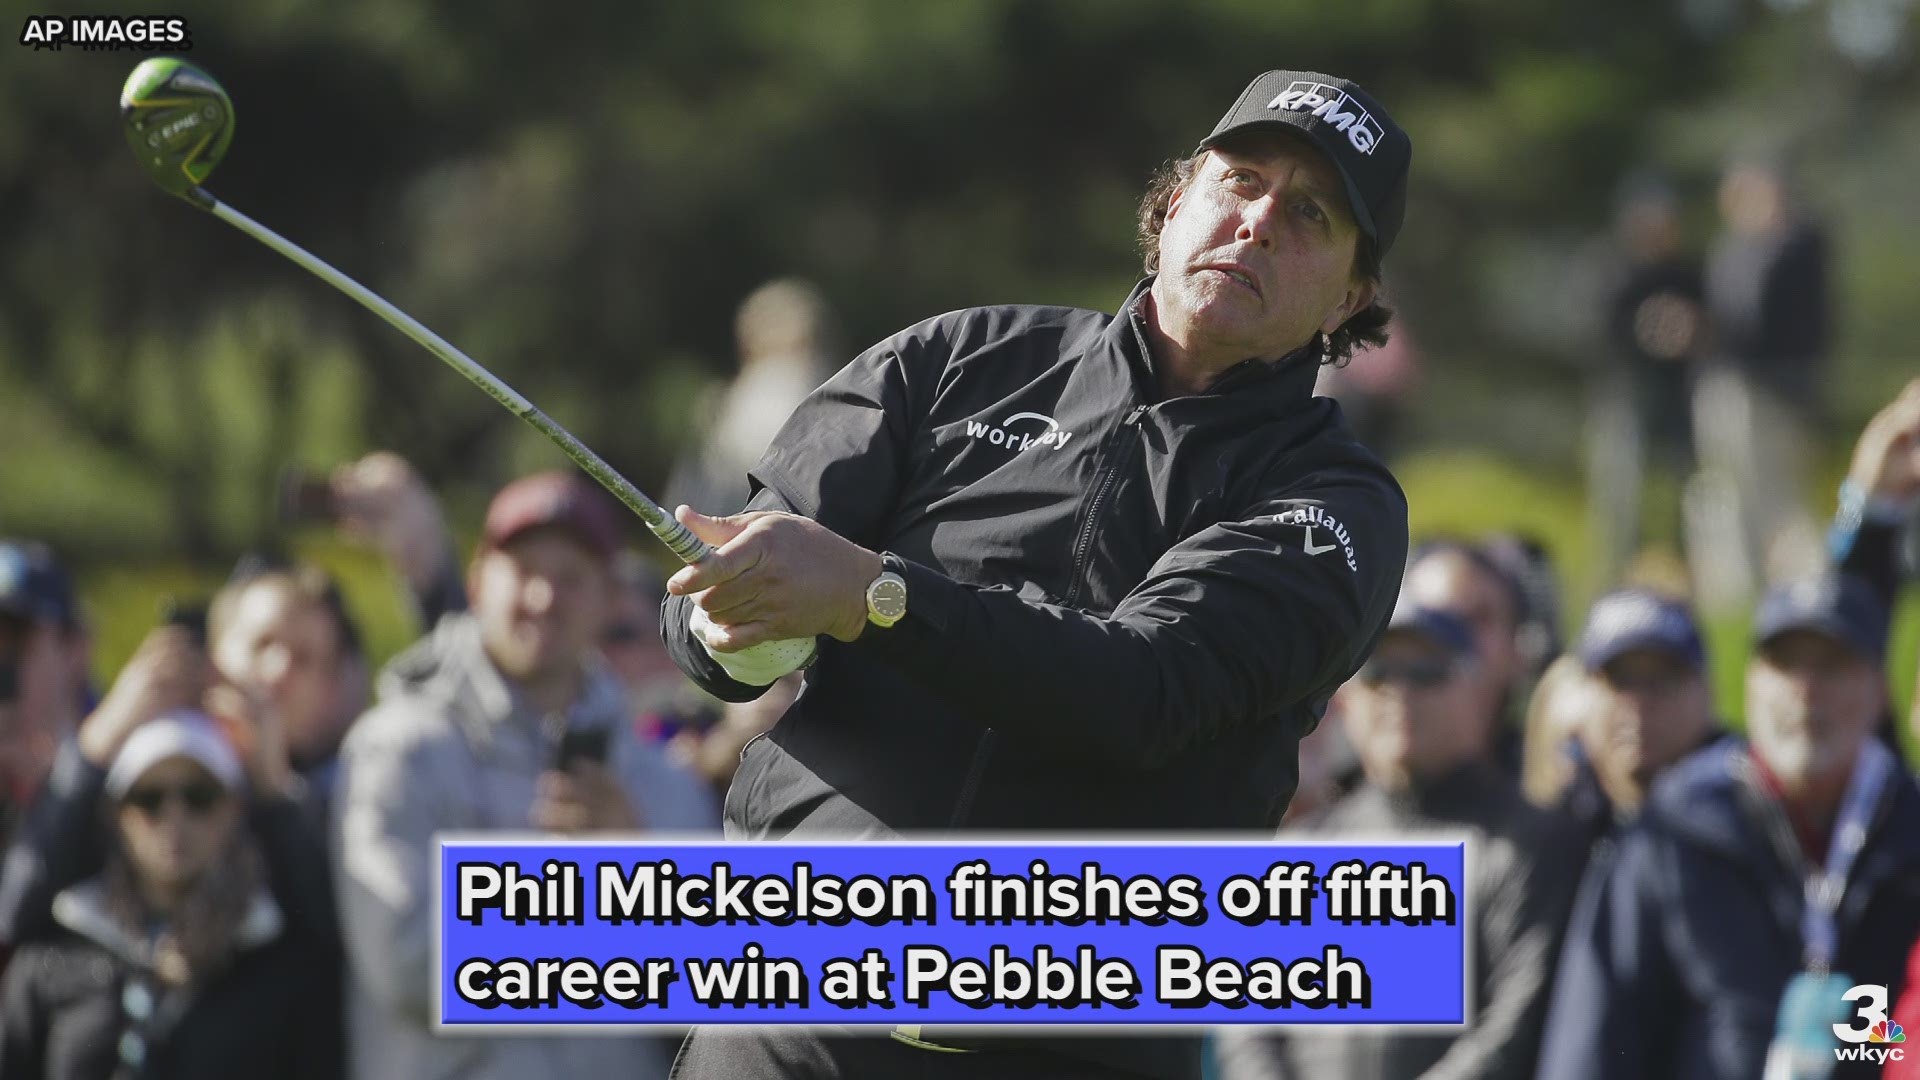 Phil Mickelson finished off his fifth career win at Pebble Beach on Monday.